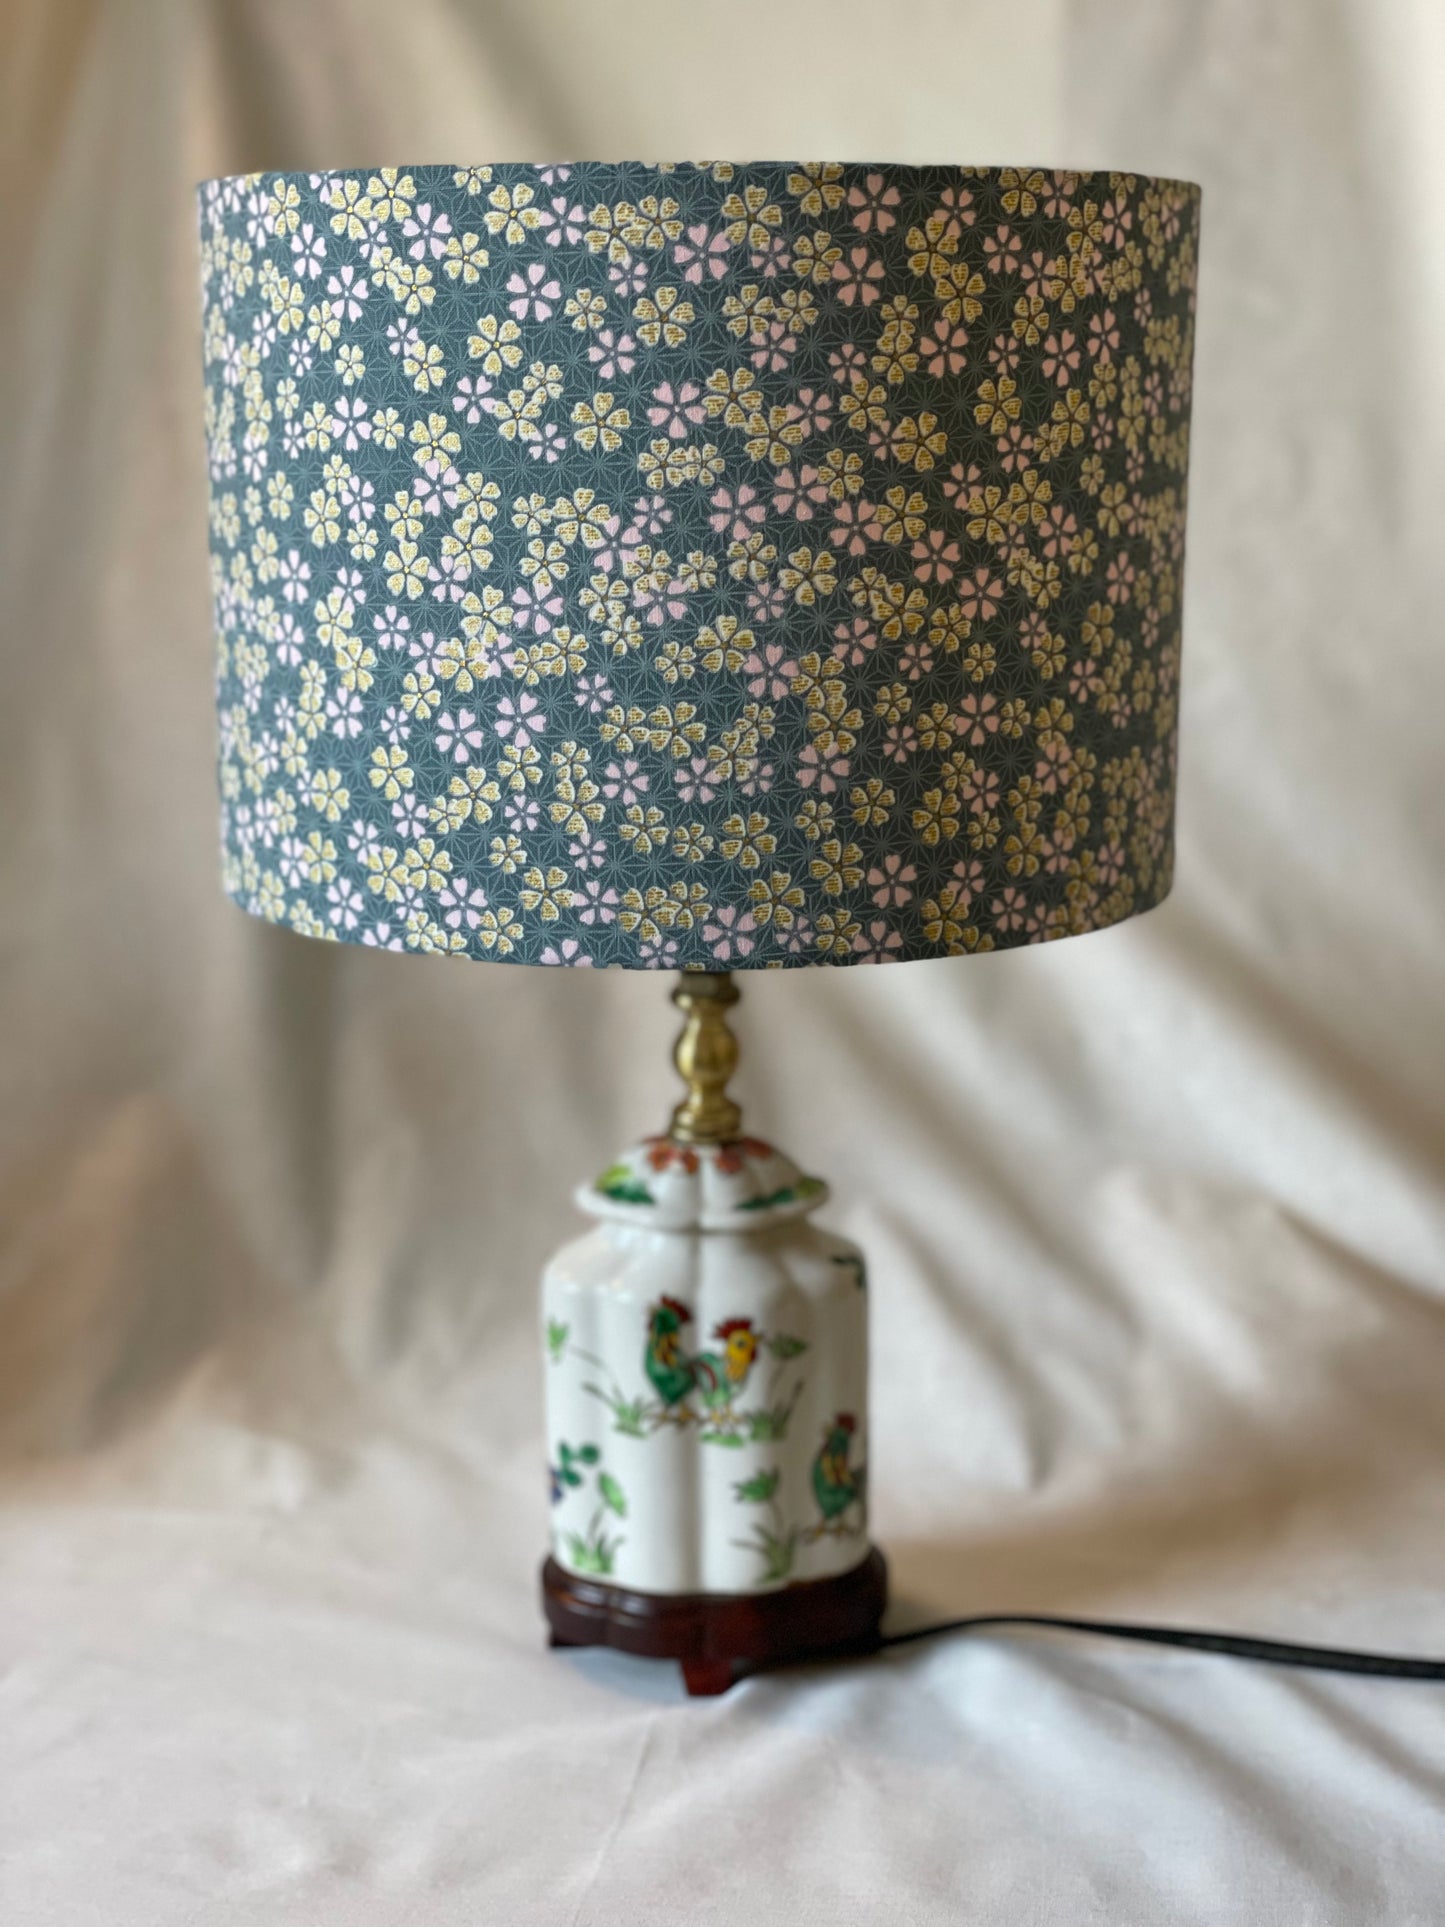 10 inch Drum Lampshade. Japanese Cherry Blossom Motif, Light Teal, Gold, and Pale Pink.